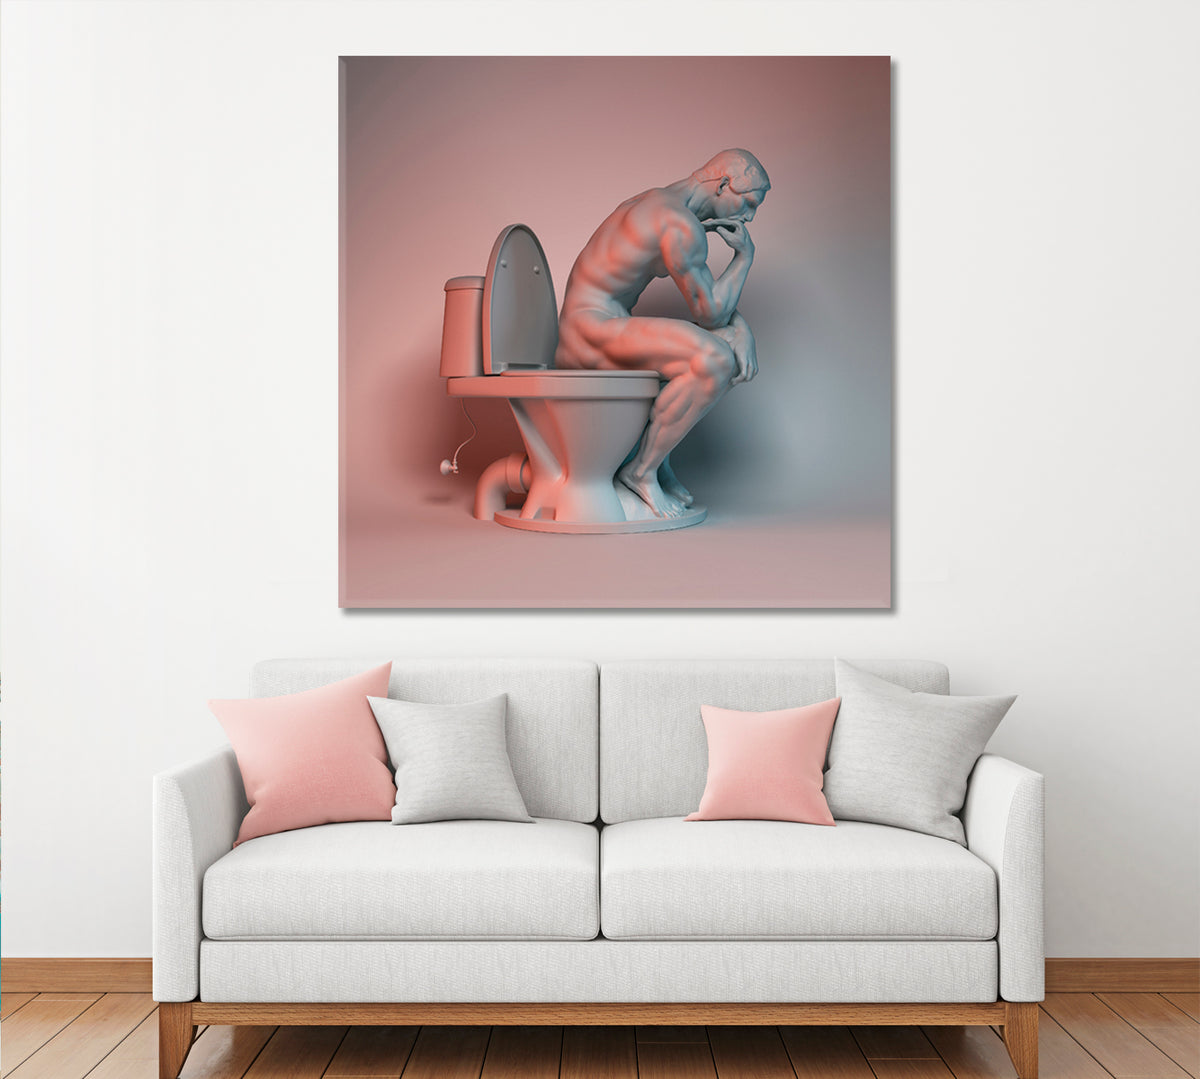 RODIN THE THINKER Sculpture Of Muscular Athlete On Toilet Abstract Art Print Artesty 1 Panel 12"x12" 